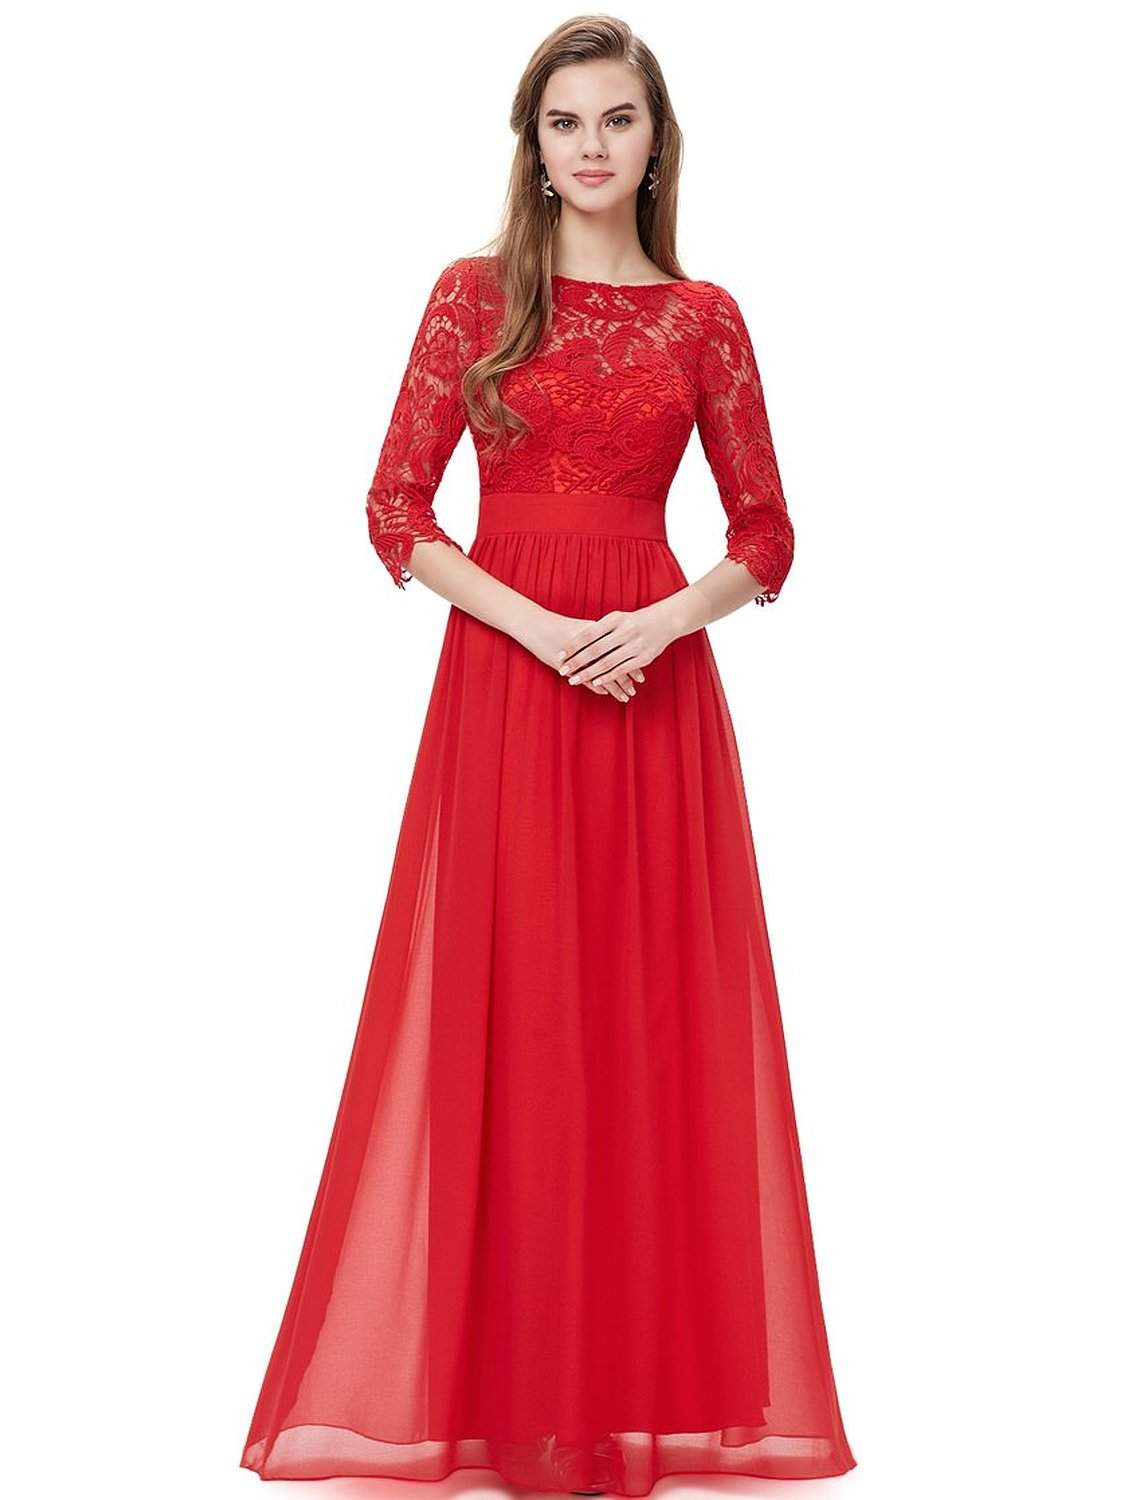 Red Wedding Gowns
 25 Red Wedding Dresses You’ll Absolutely Love 2018